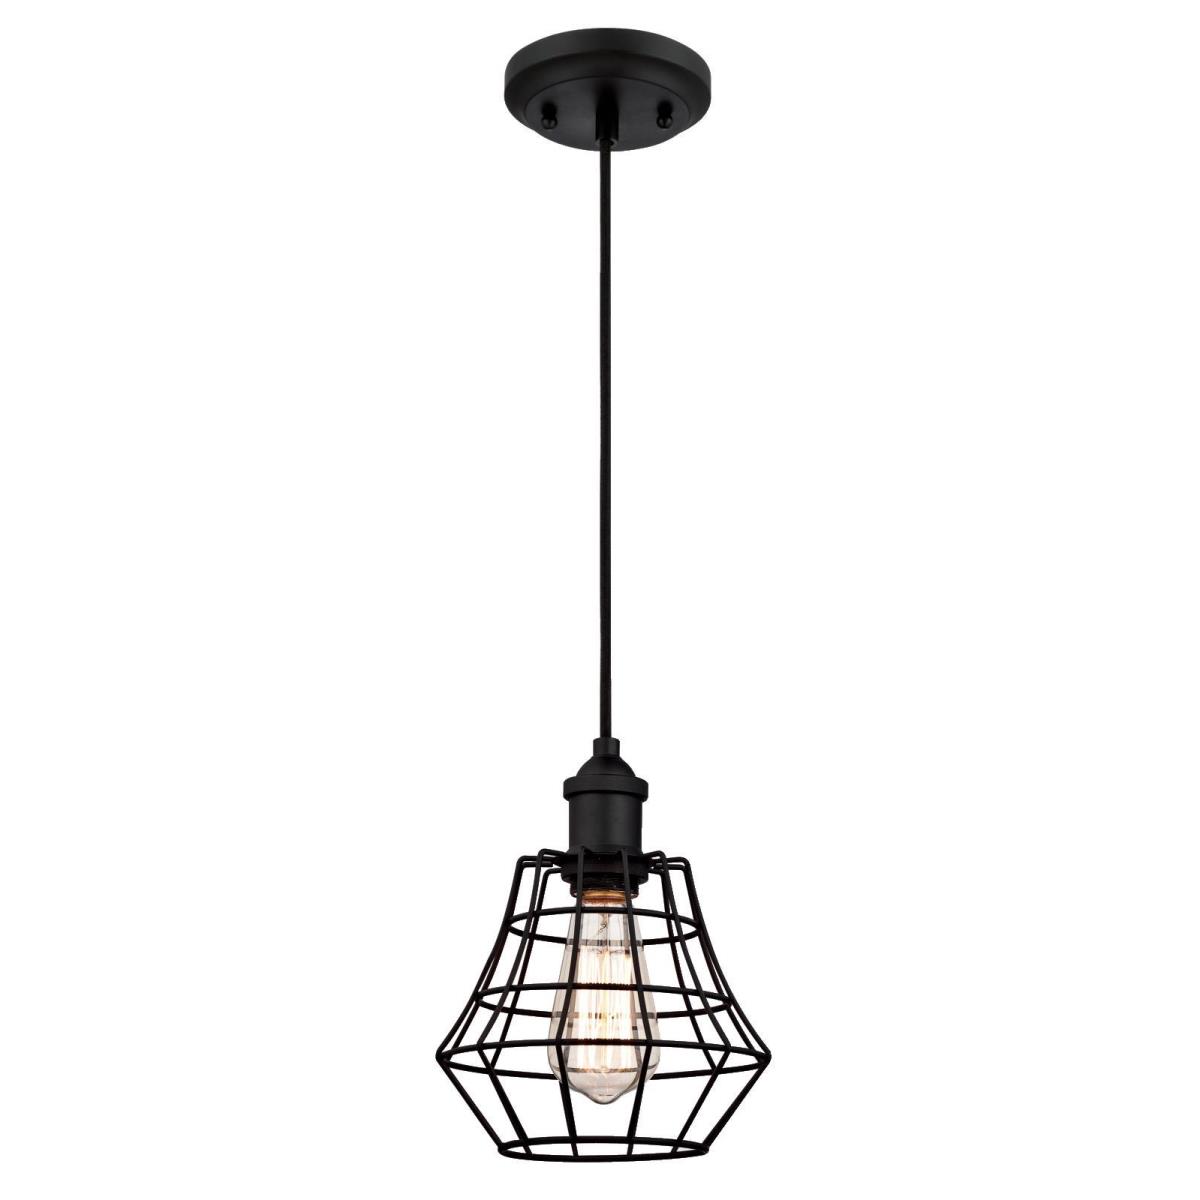 1 Light Mini Pendant Matte Black Finish with Angled Bell Cage Shade